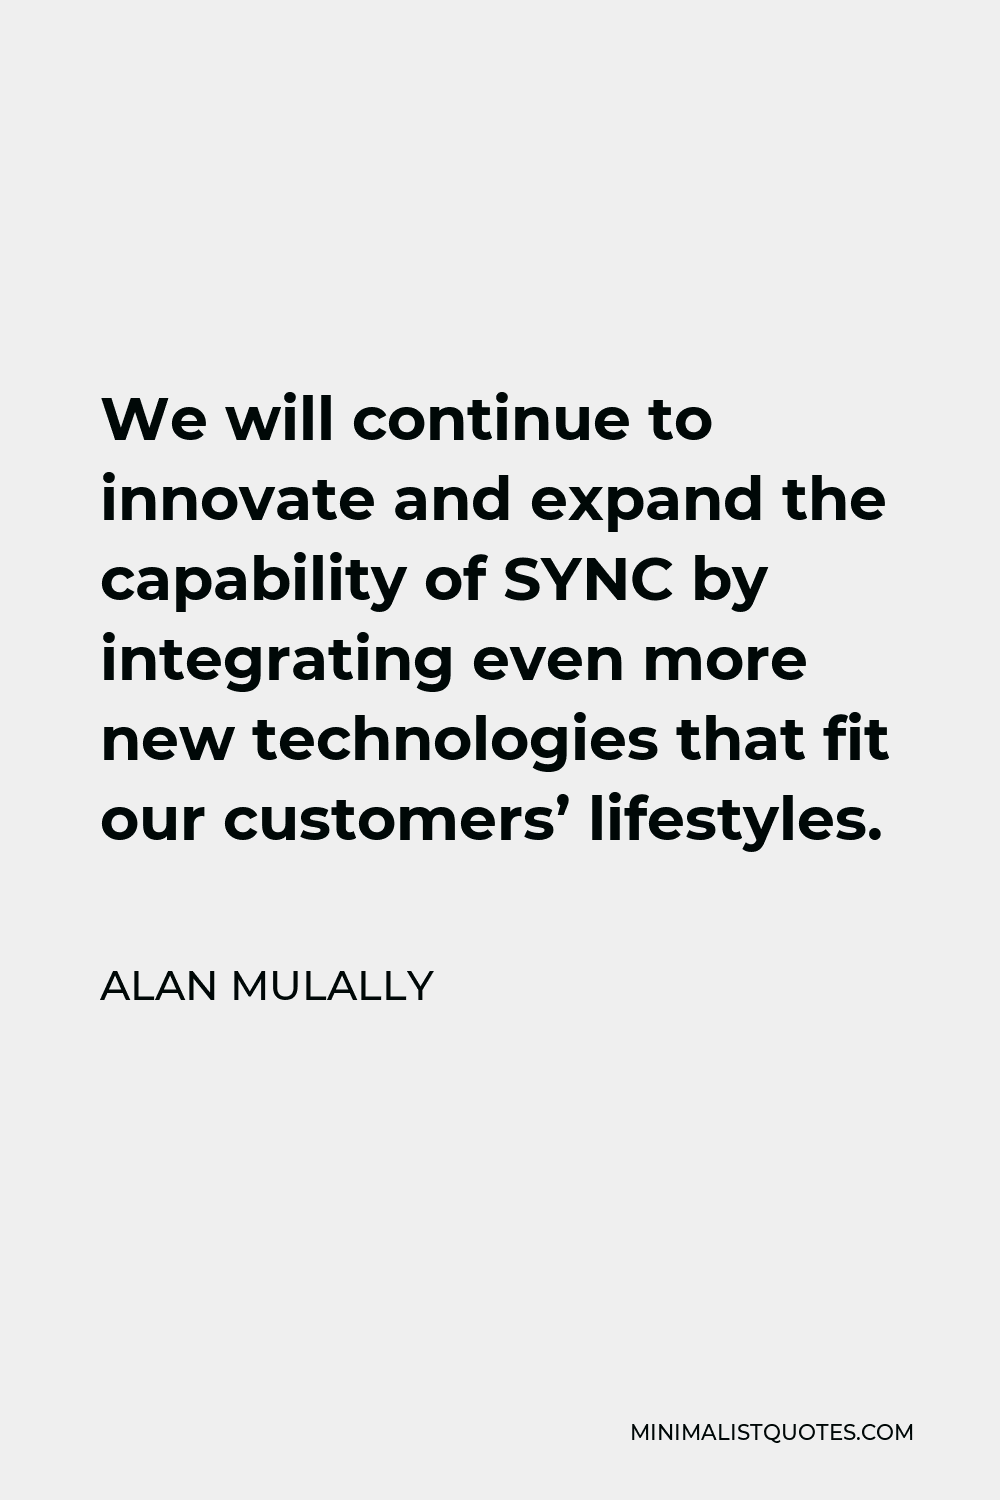 Alan Mulally Quote - We will continue to innovate and expand the capability of SYNC by integrating even more new technologies that fit our customers’ lifestyles.